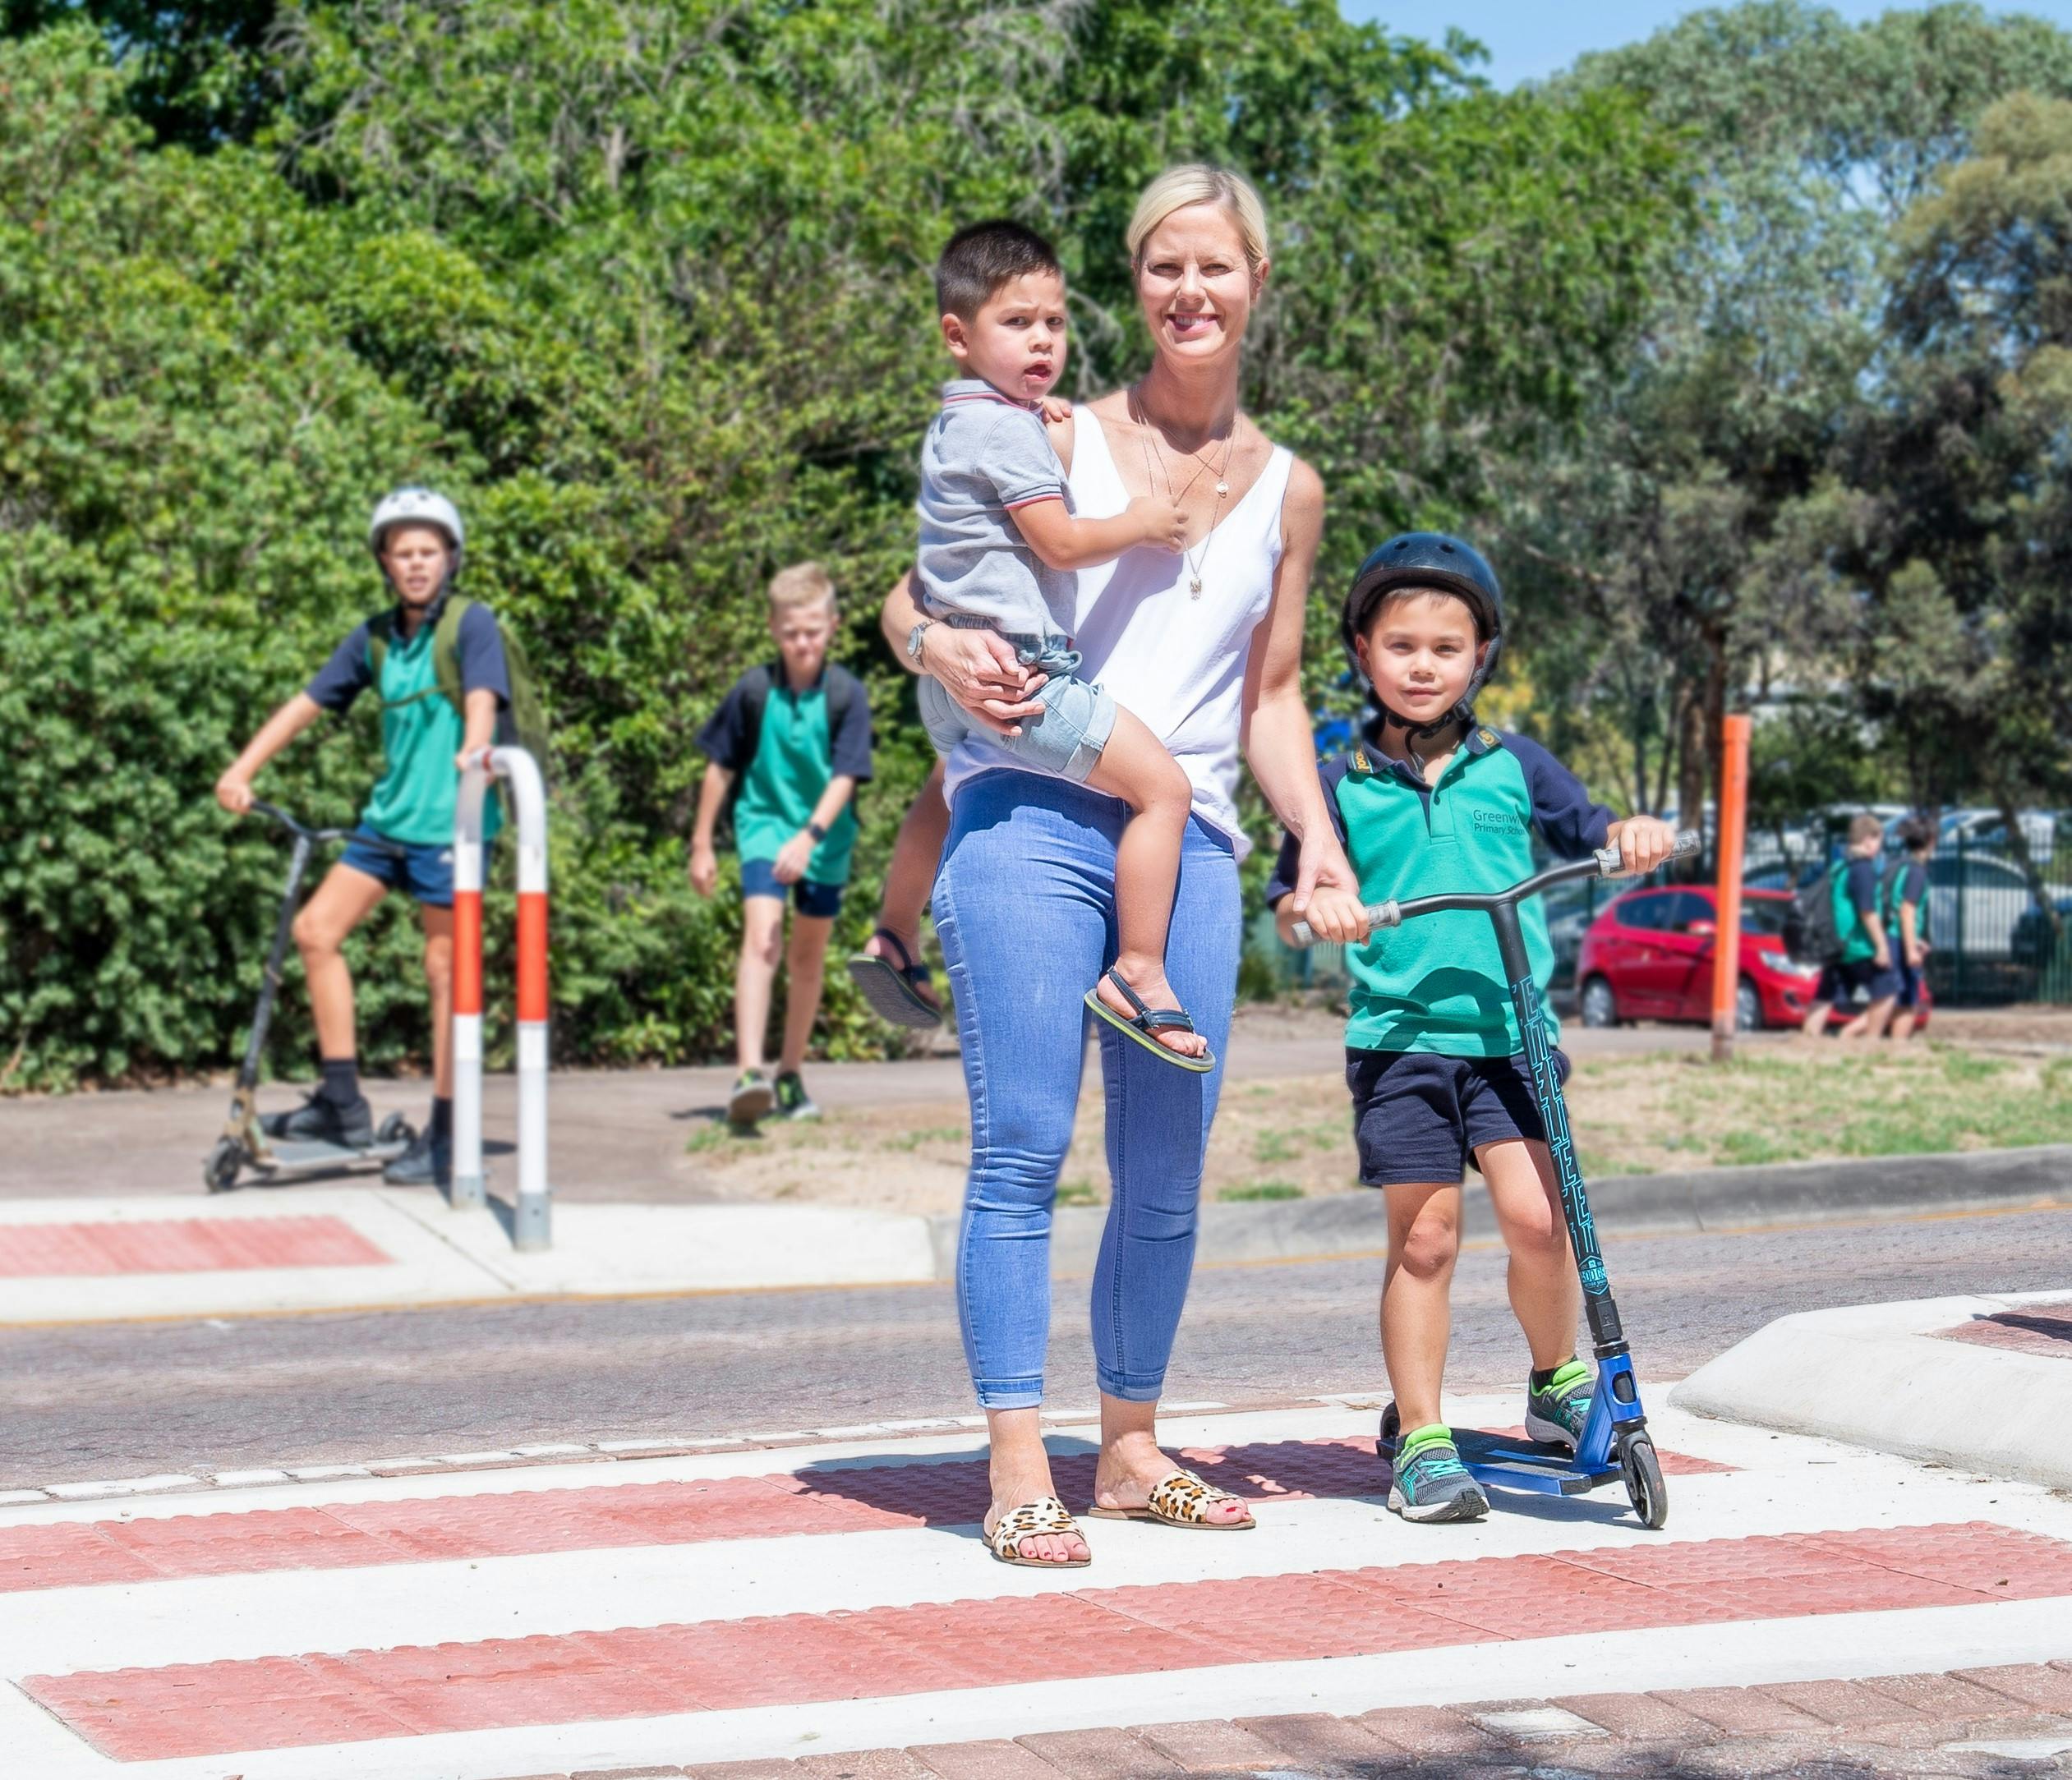 Mum holding children and another child on scooter using pedestrian crossing